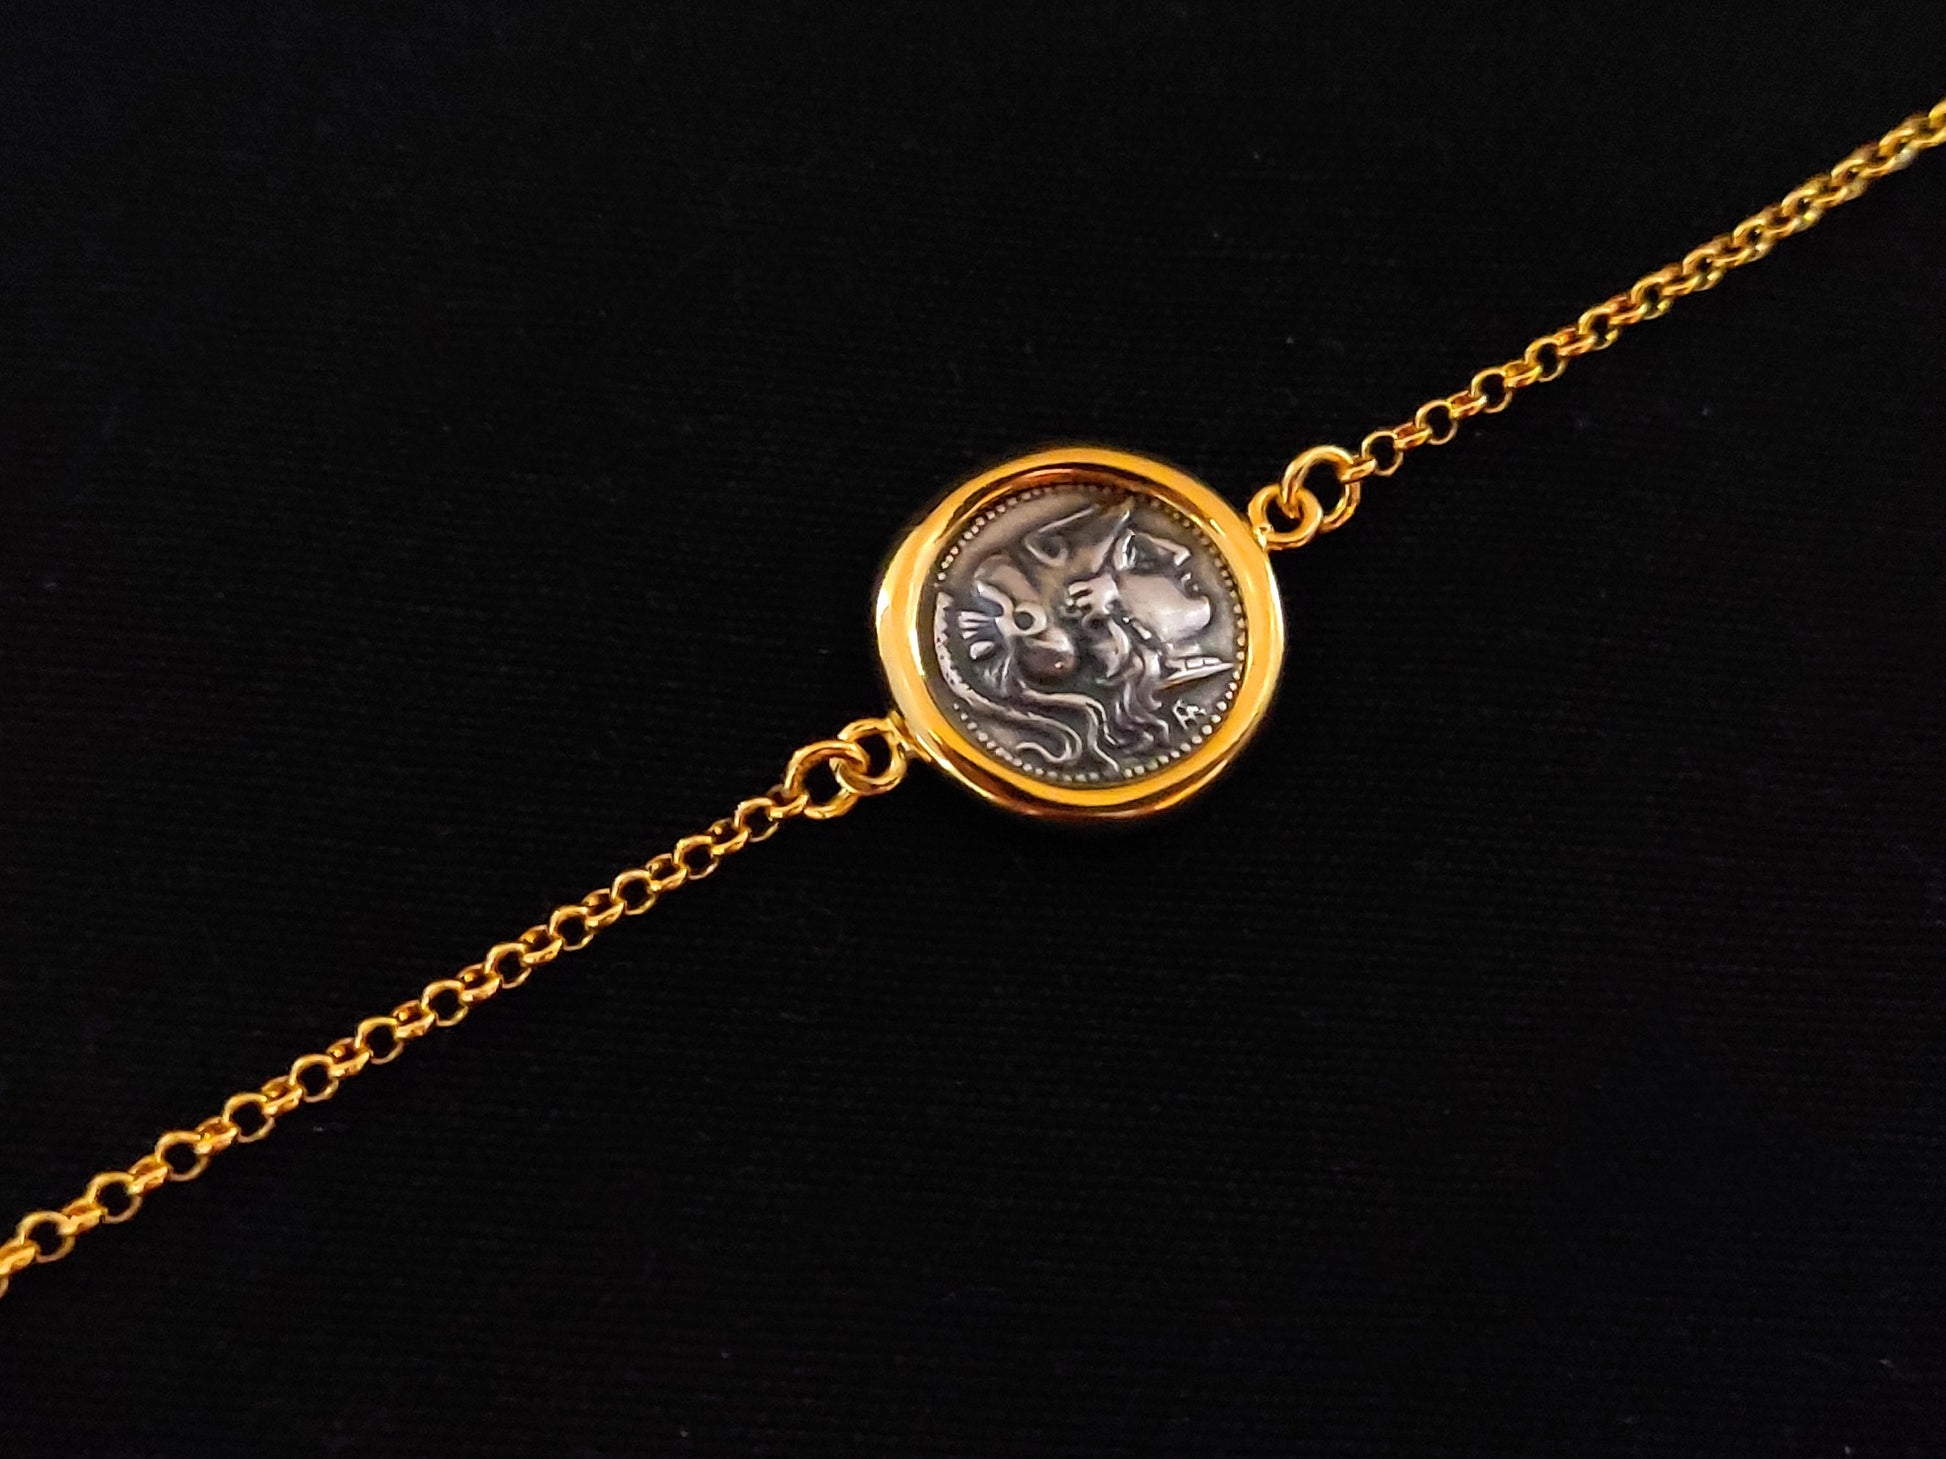 Close-up image of a Sterling Silver 925 Adjustable Bracelet adorned with a Gold-Plated 22K Ancient Greek Goddess Athena Minerva Replica Coin, showcasing intricate craftsmanship and timeless elegance.